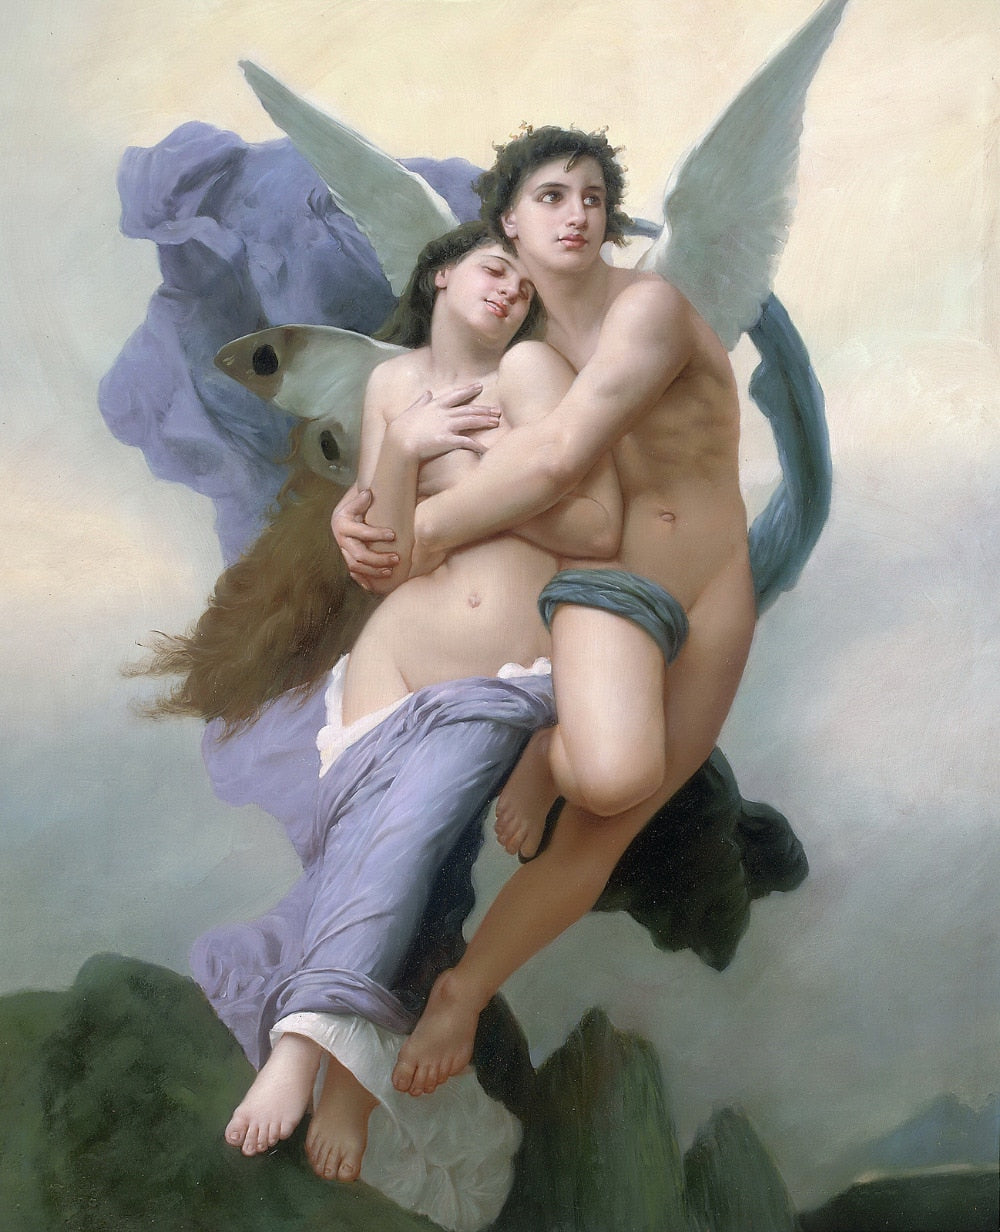 Handmade Oil painting reproduction Le ravissement de Psyche aka The Abduction of Psyche by William Bouguereau